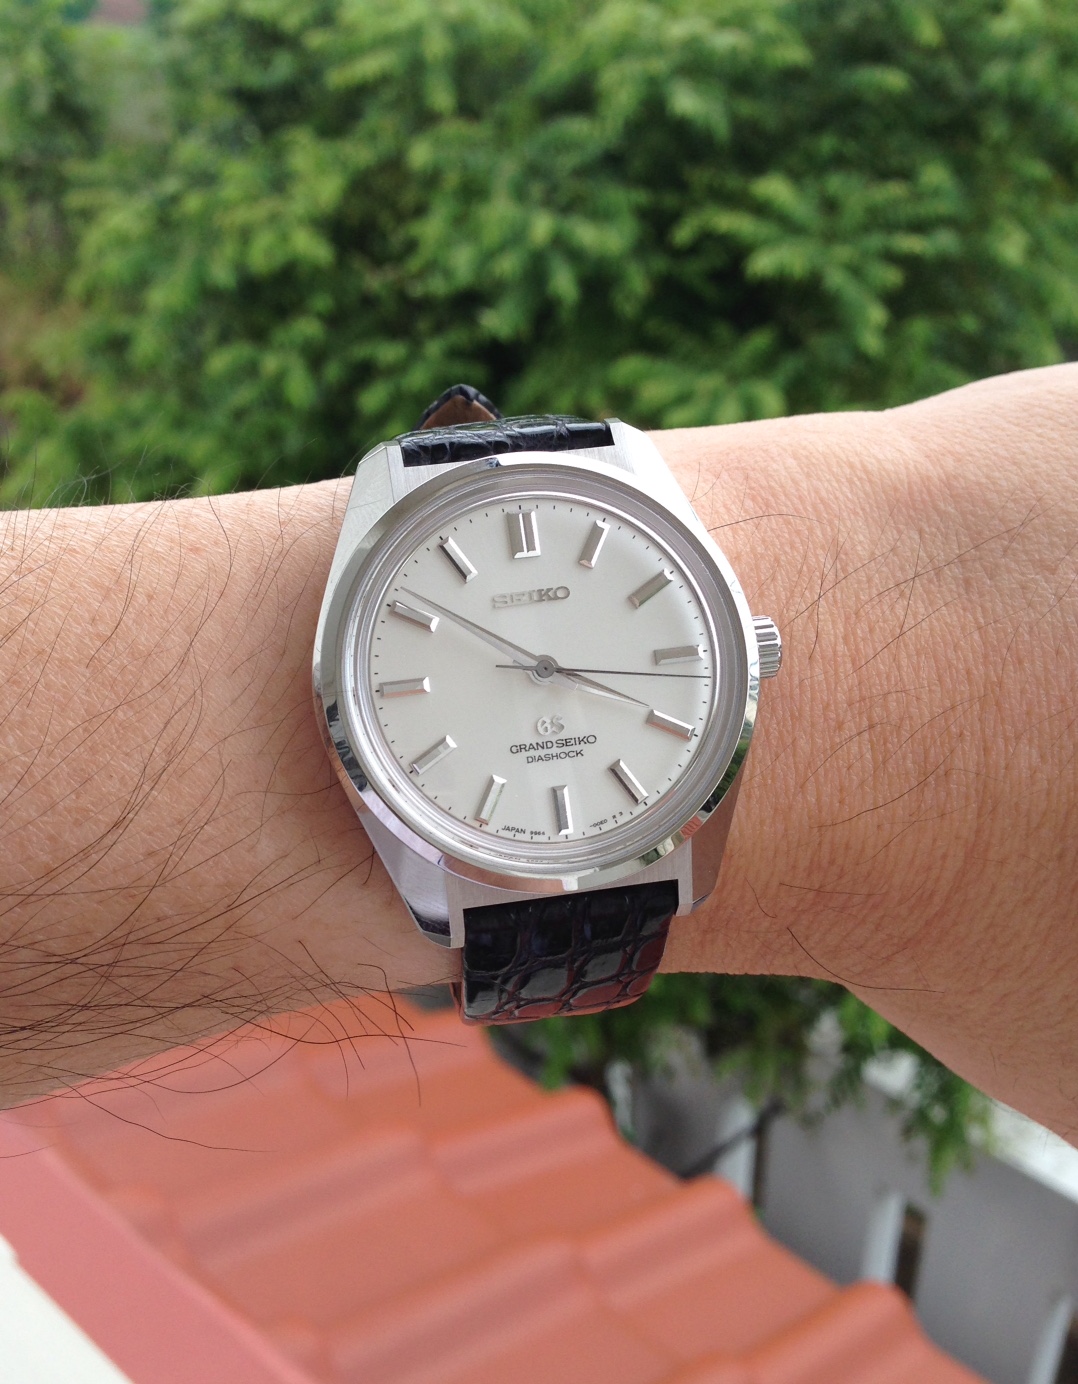 New Arrival: Grand Seiko SBGW047 | Omega Forums